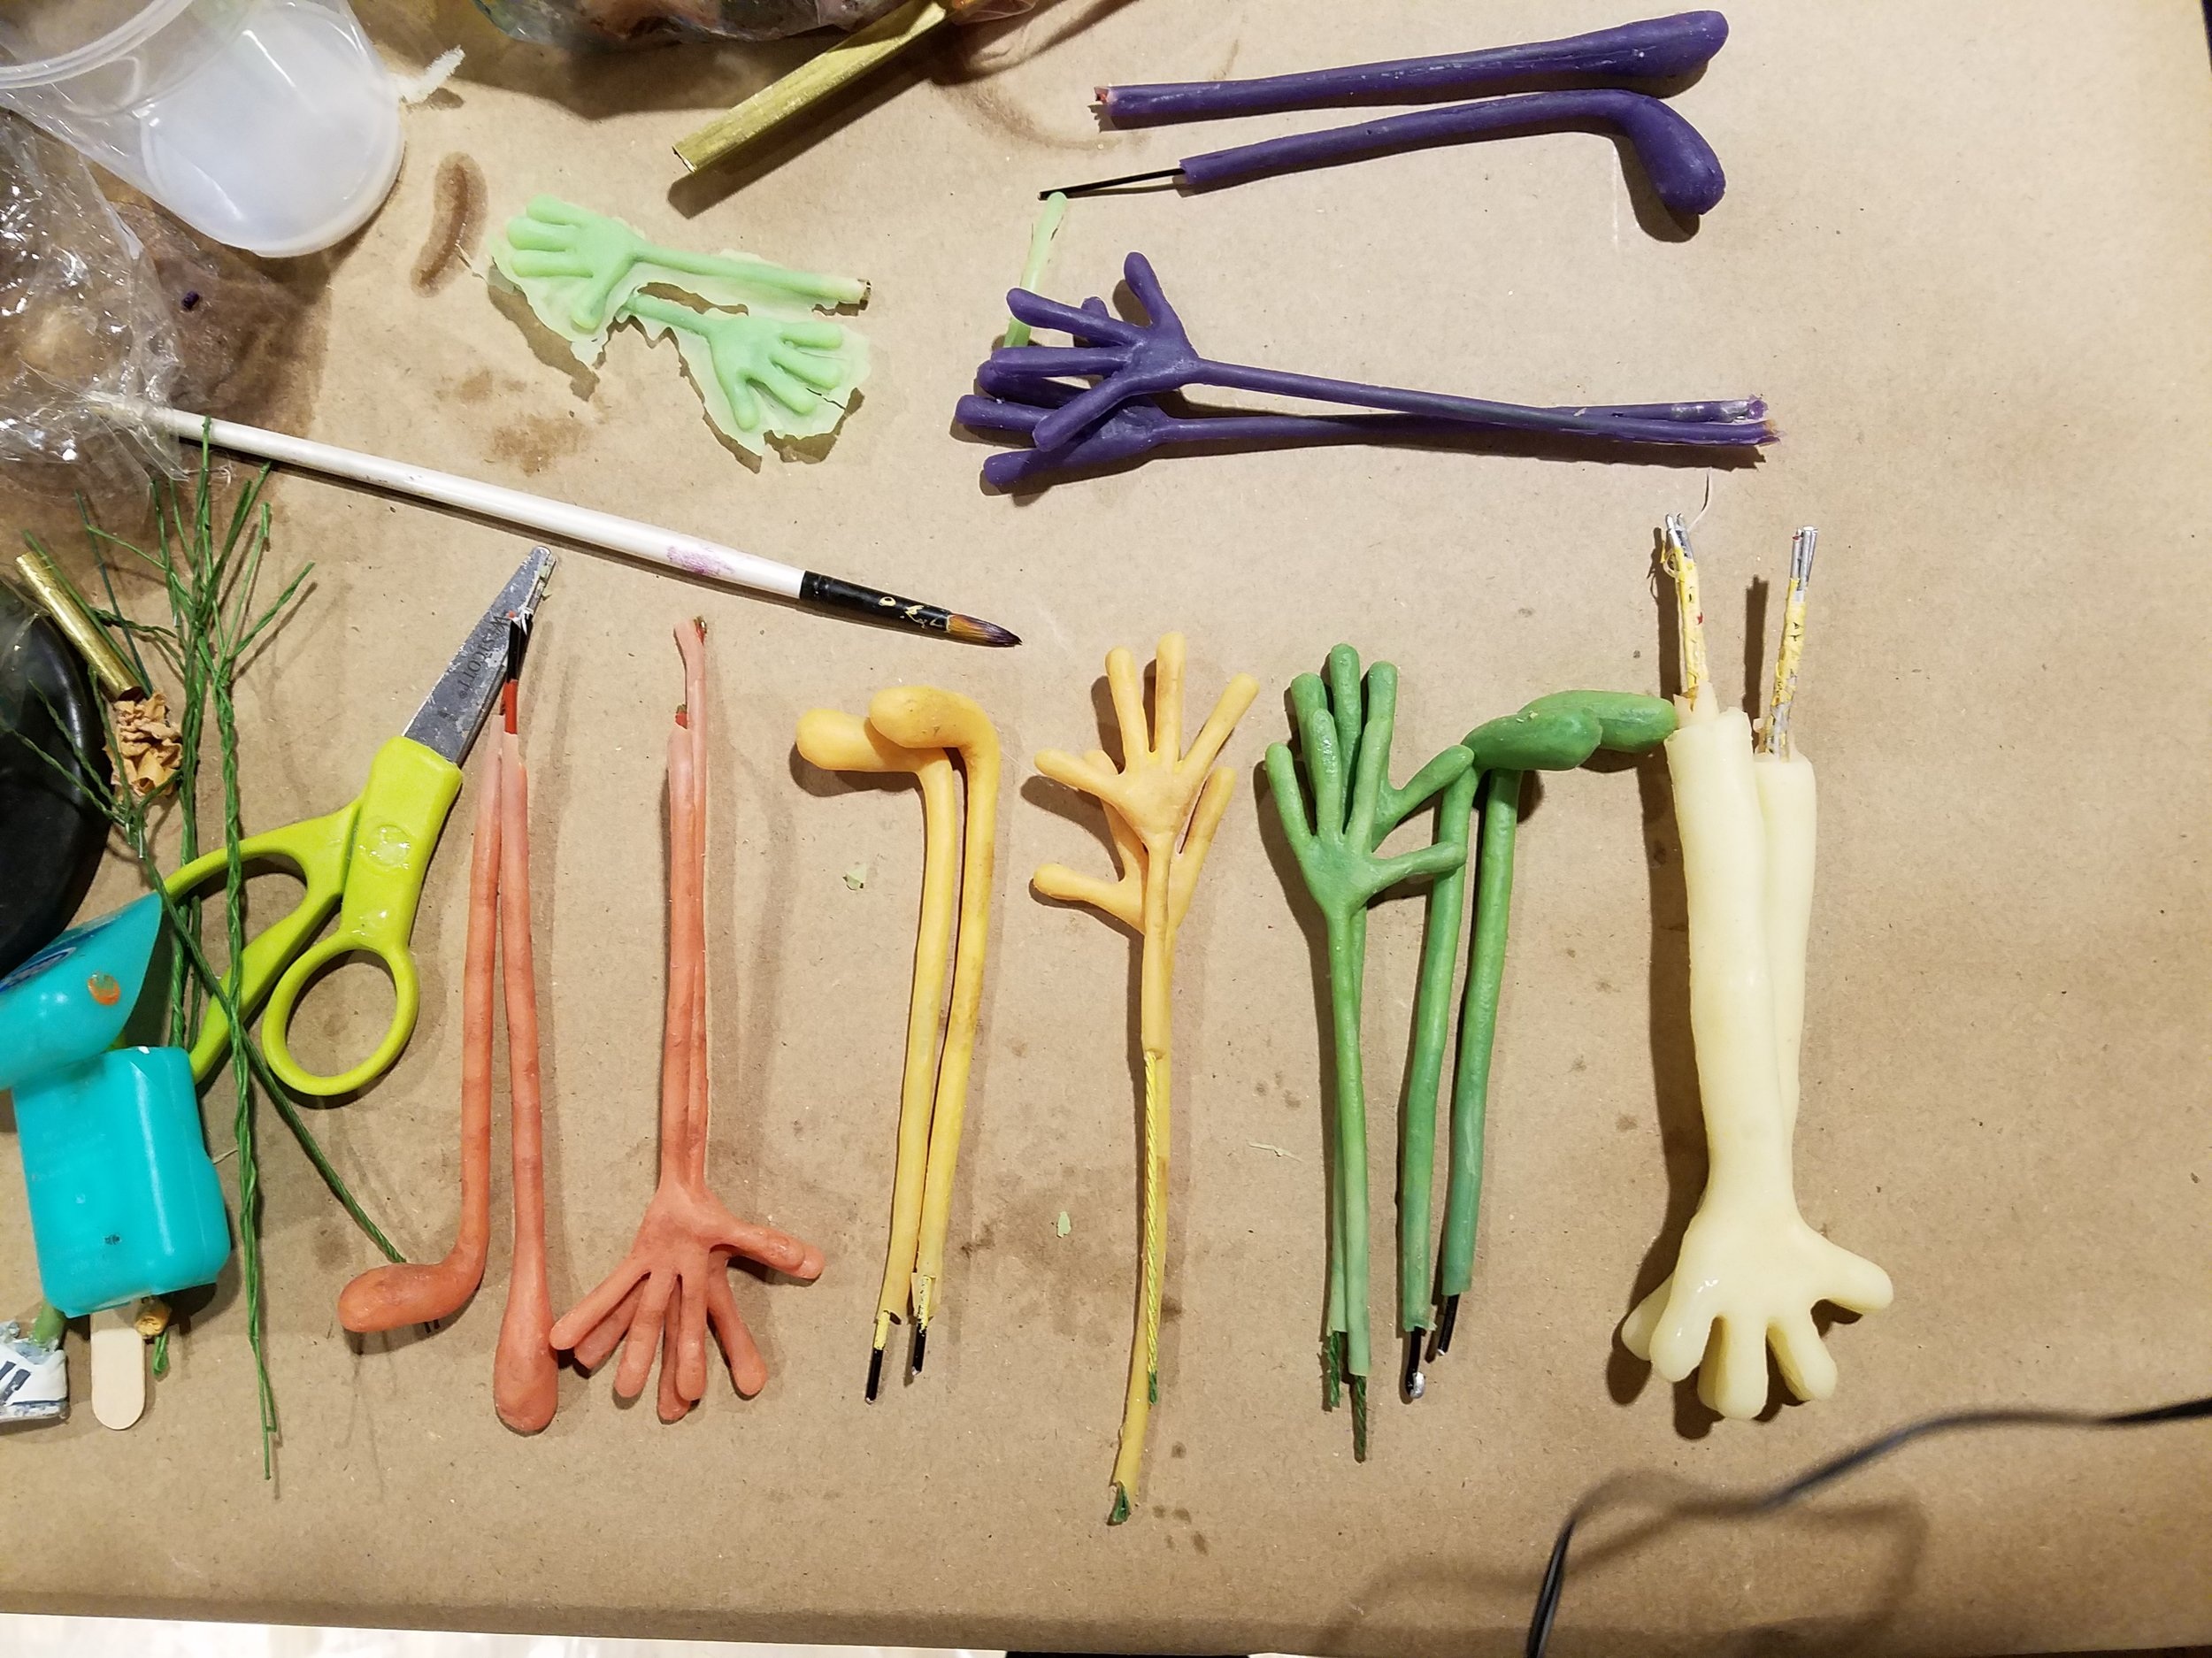  Each food group had its own type of limb, and each puppet had it’s own color 